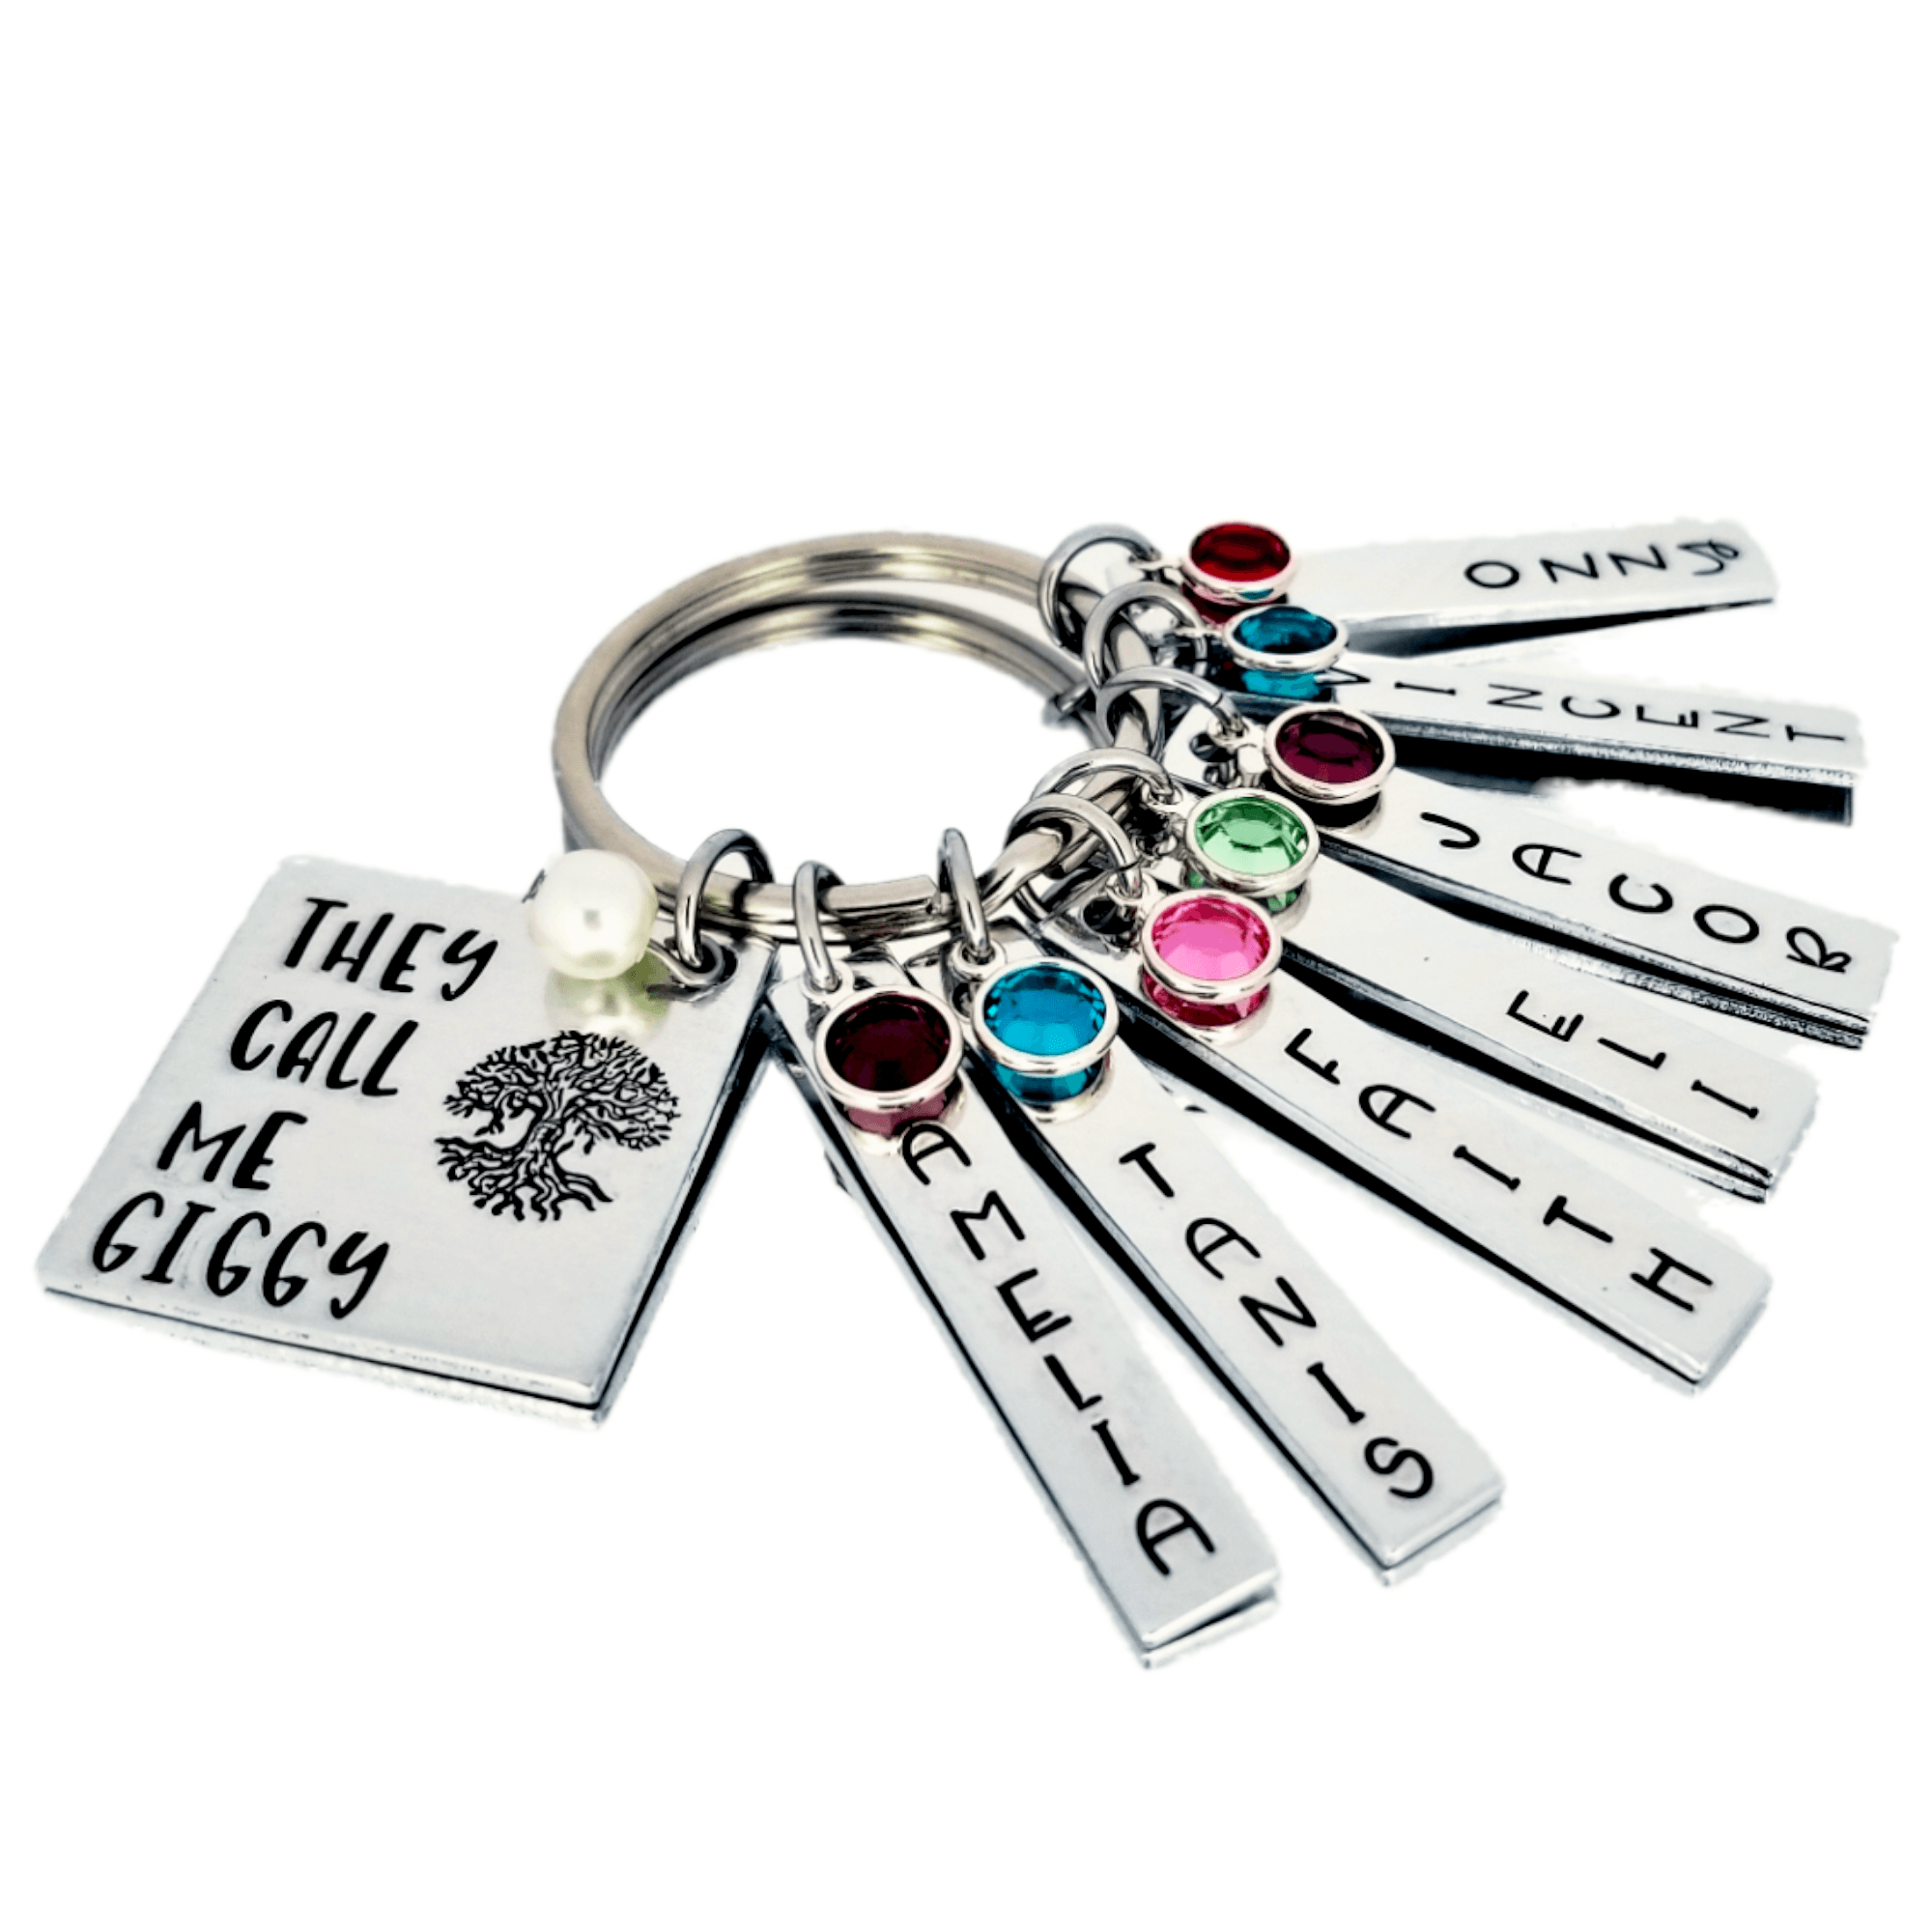 They Call Me Granny, Grandma Keychains, Grandmother Gift, Gift from the kids, Mothers day, Mothers Gift